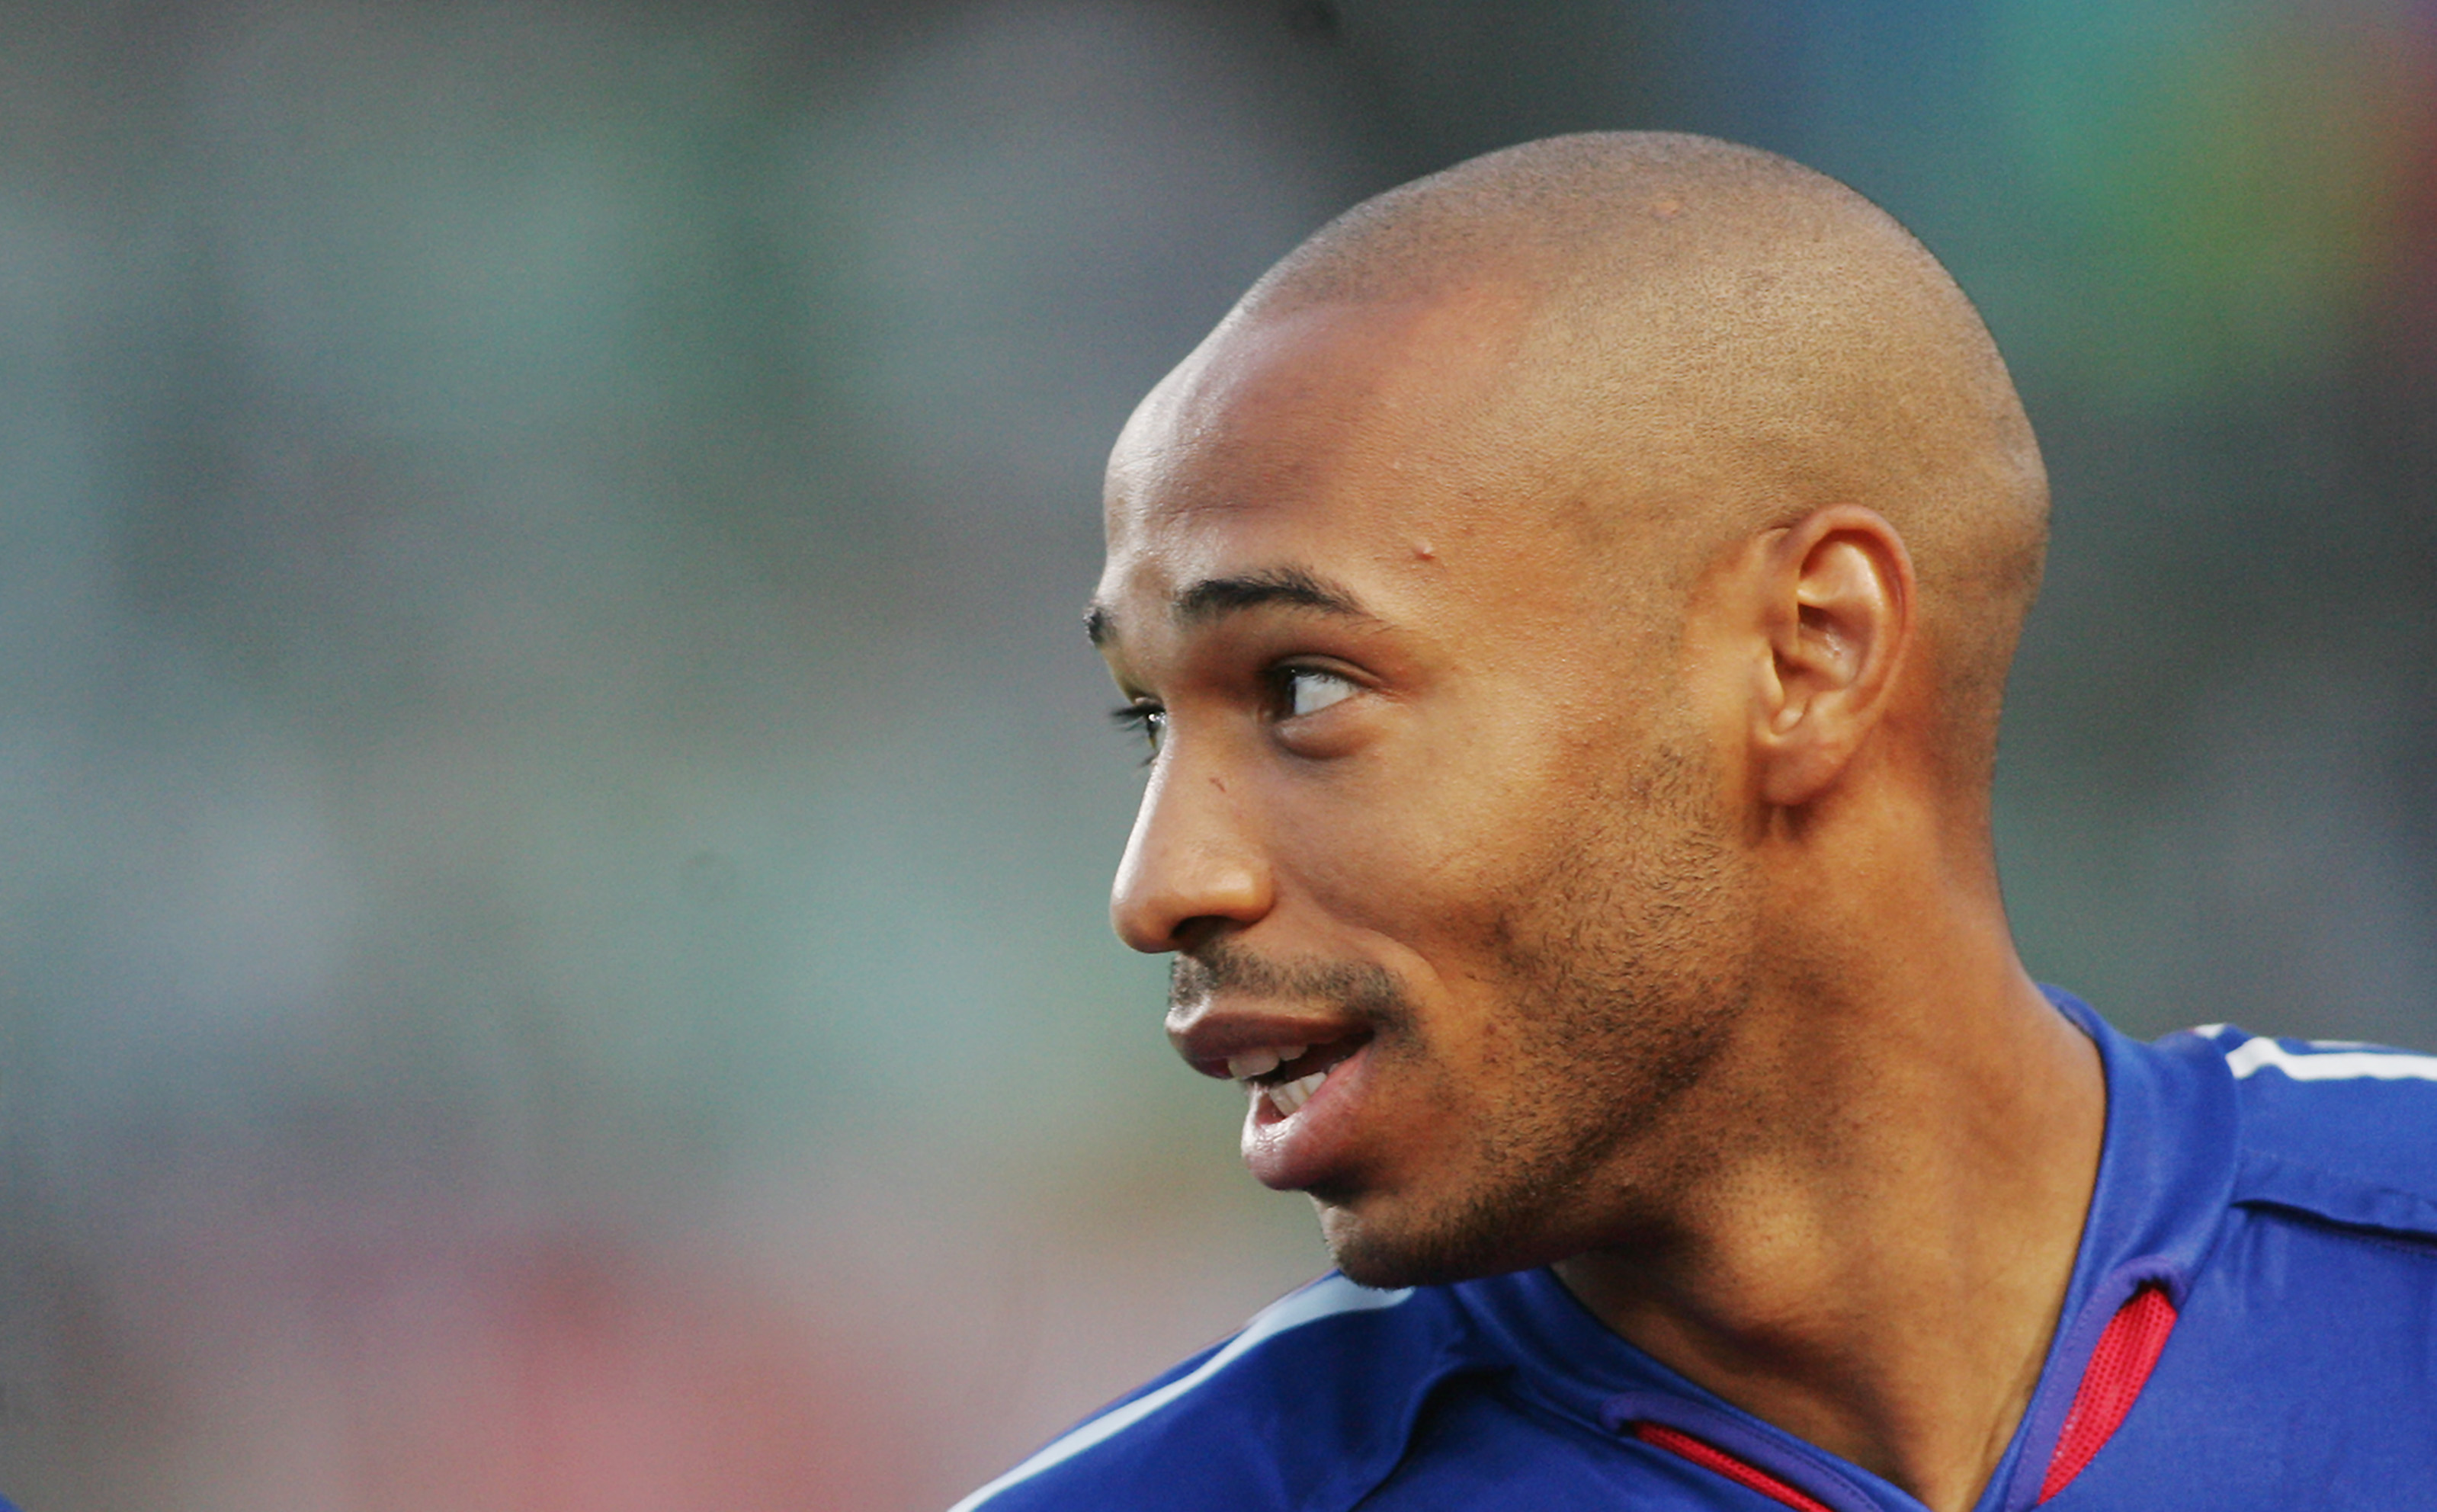 DUBLIN, IRELAND-SEPTEMBER 7:  A portrait of Thierry Henry of France prior to the FIFA World Cup 2006 Qualifying Match between Ireland and France at Lansdowne Road on September 7, 2005 in Dublin, Ireland (Photo by Stu Forster/Getty Images)